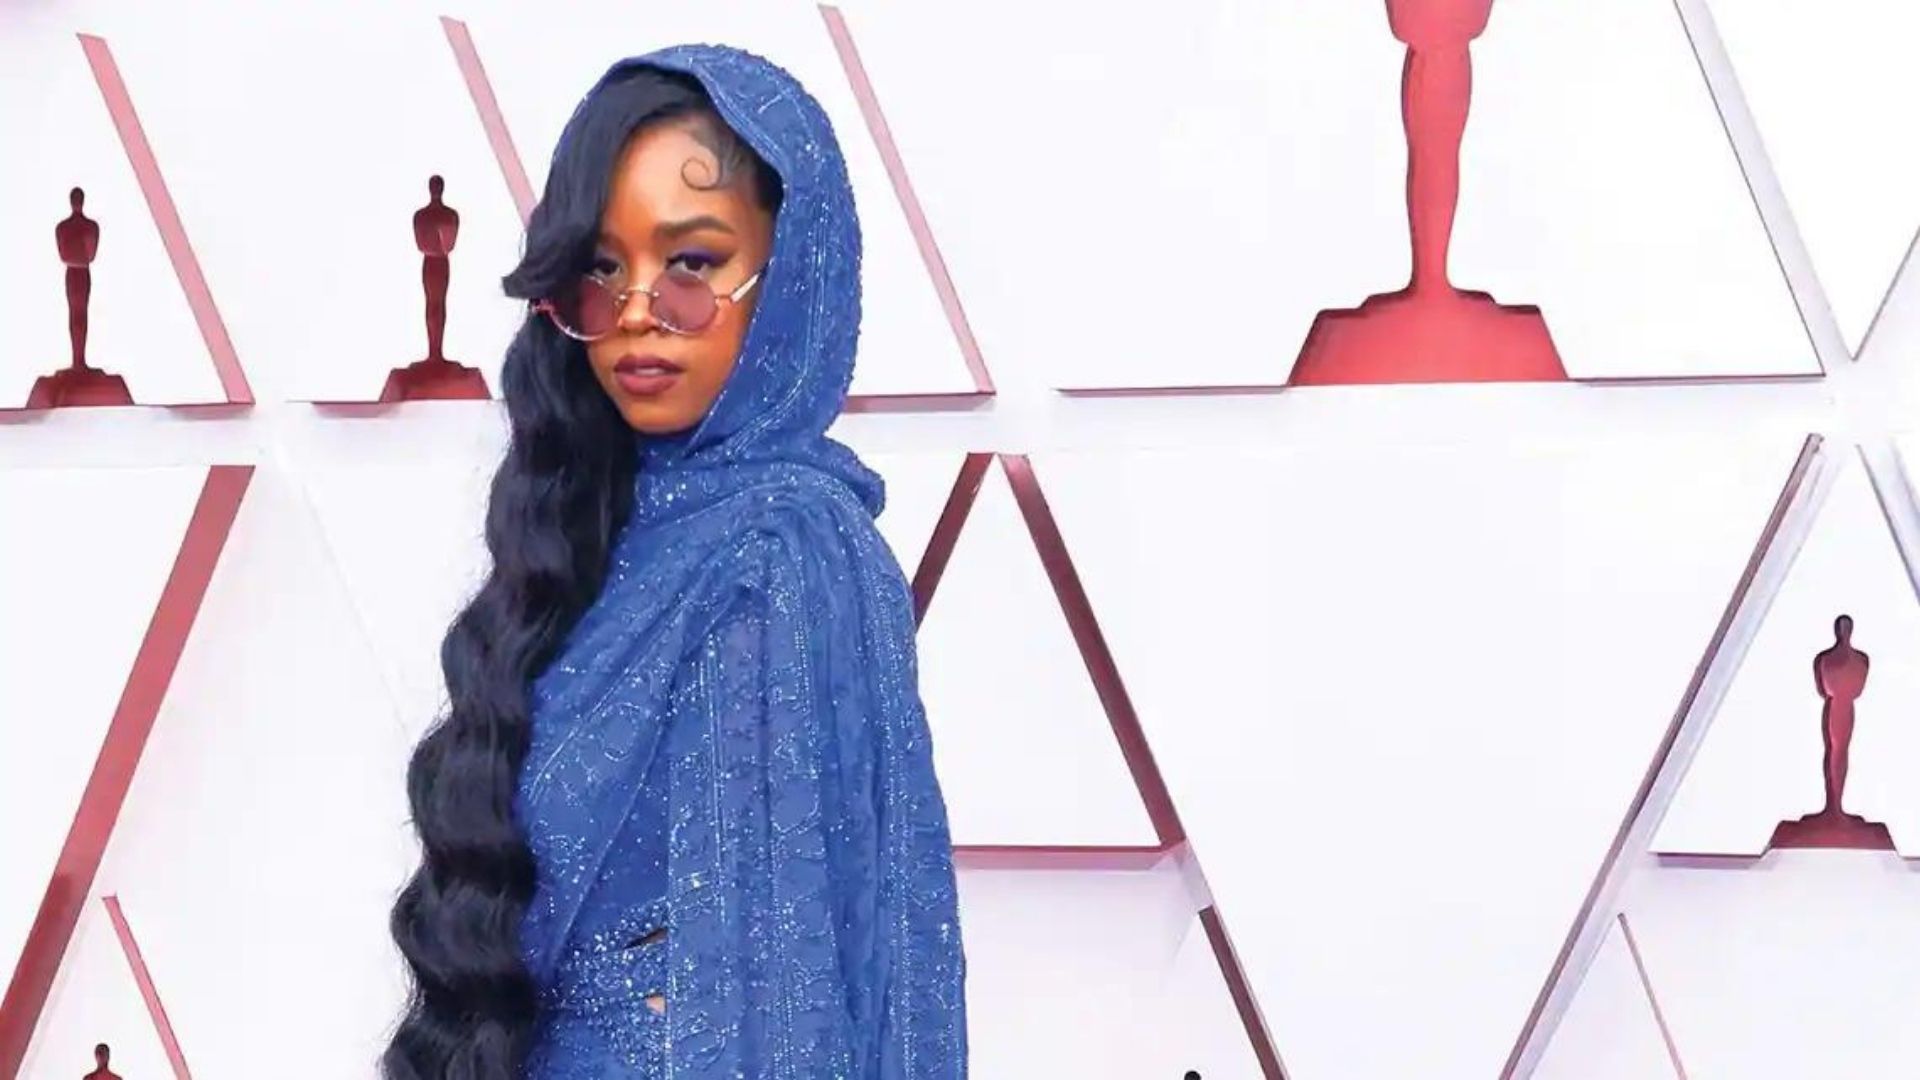 H.E.R’s Oscar dress had all-over hand-embroidery done by Indian artisans